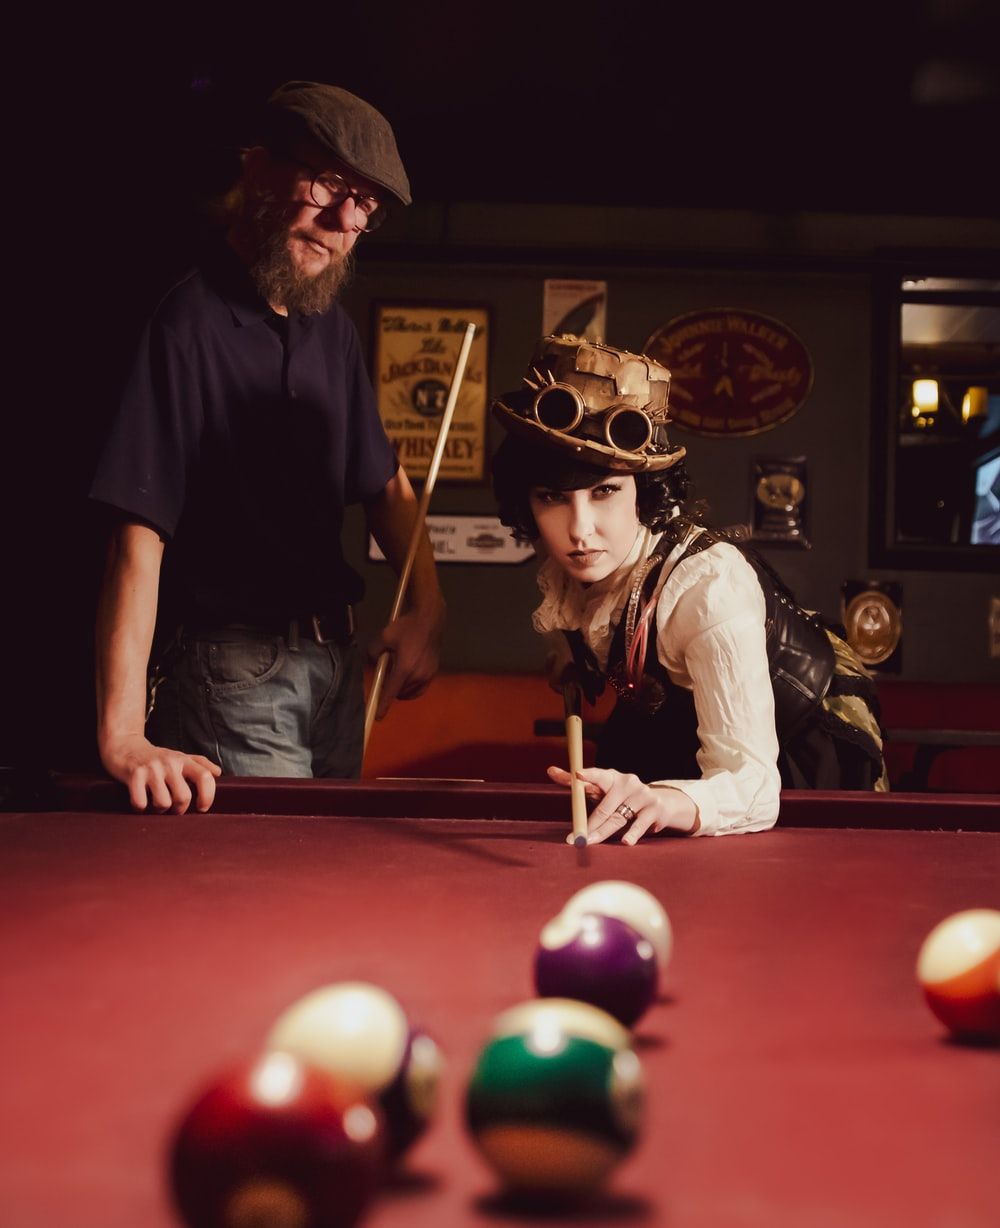 Billiards Picture. Download Free Image